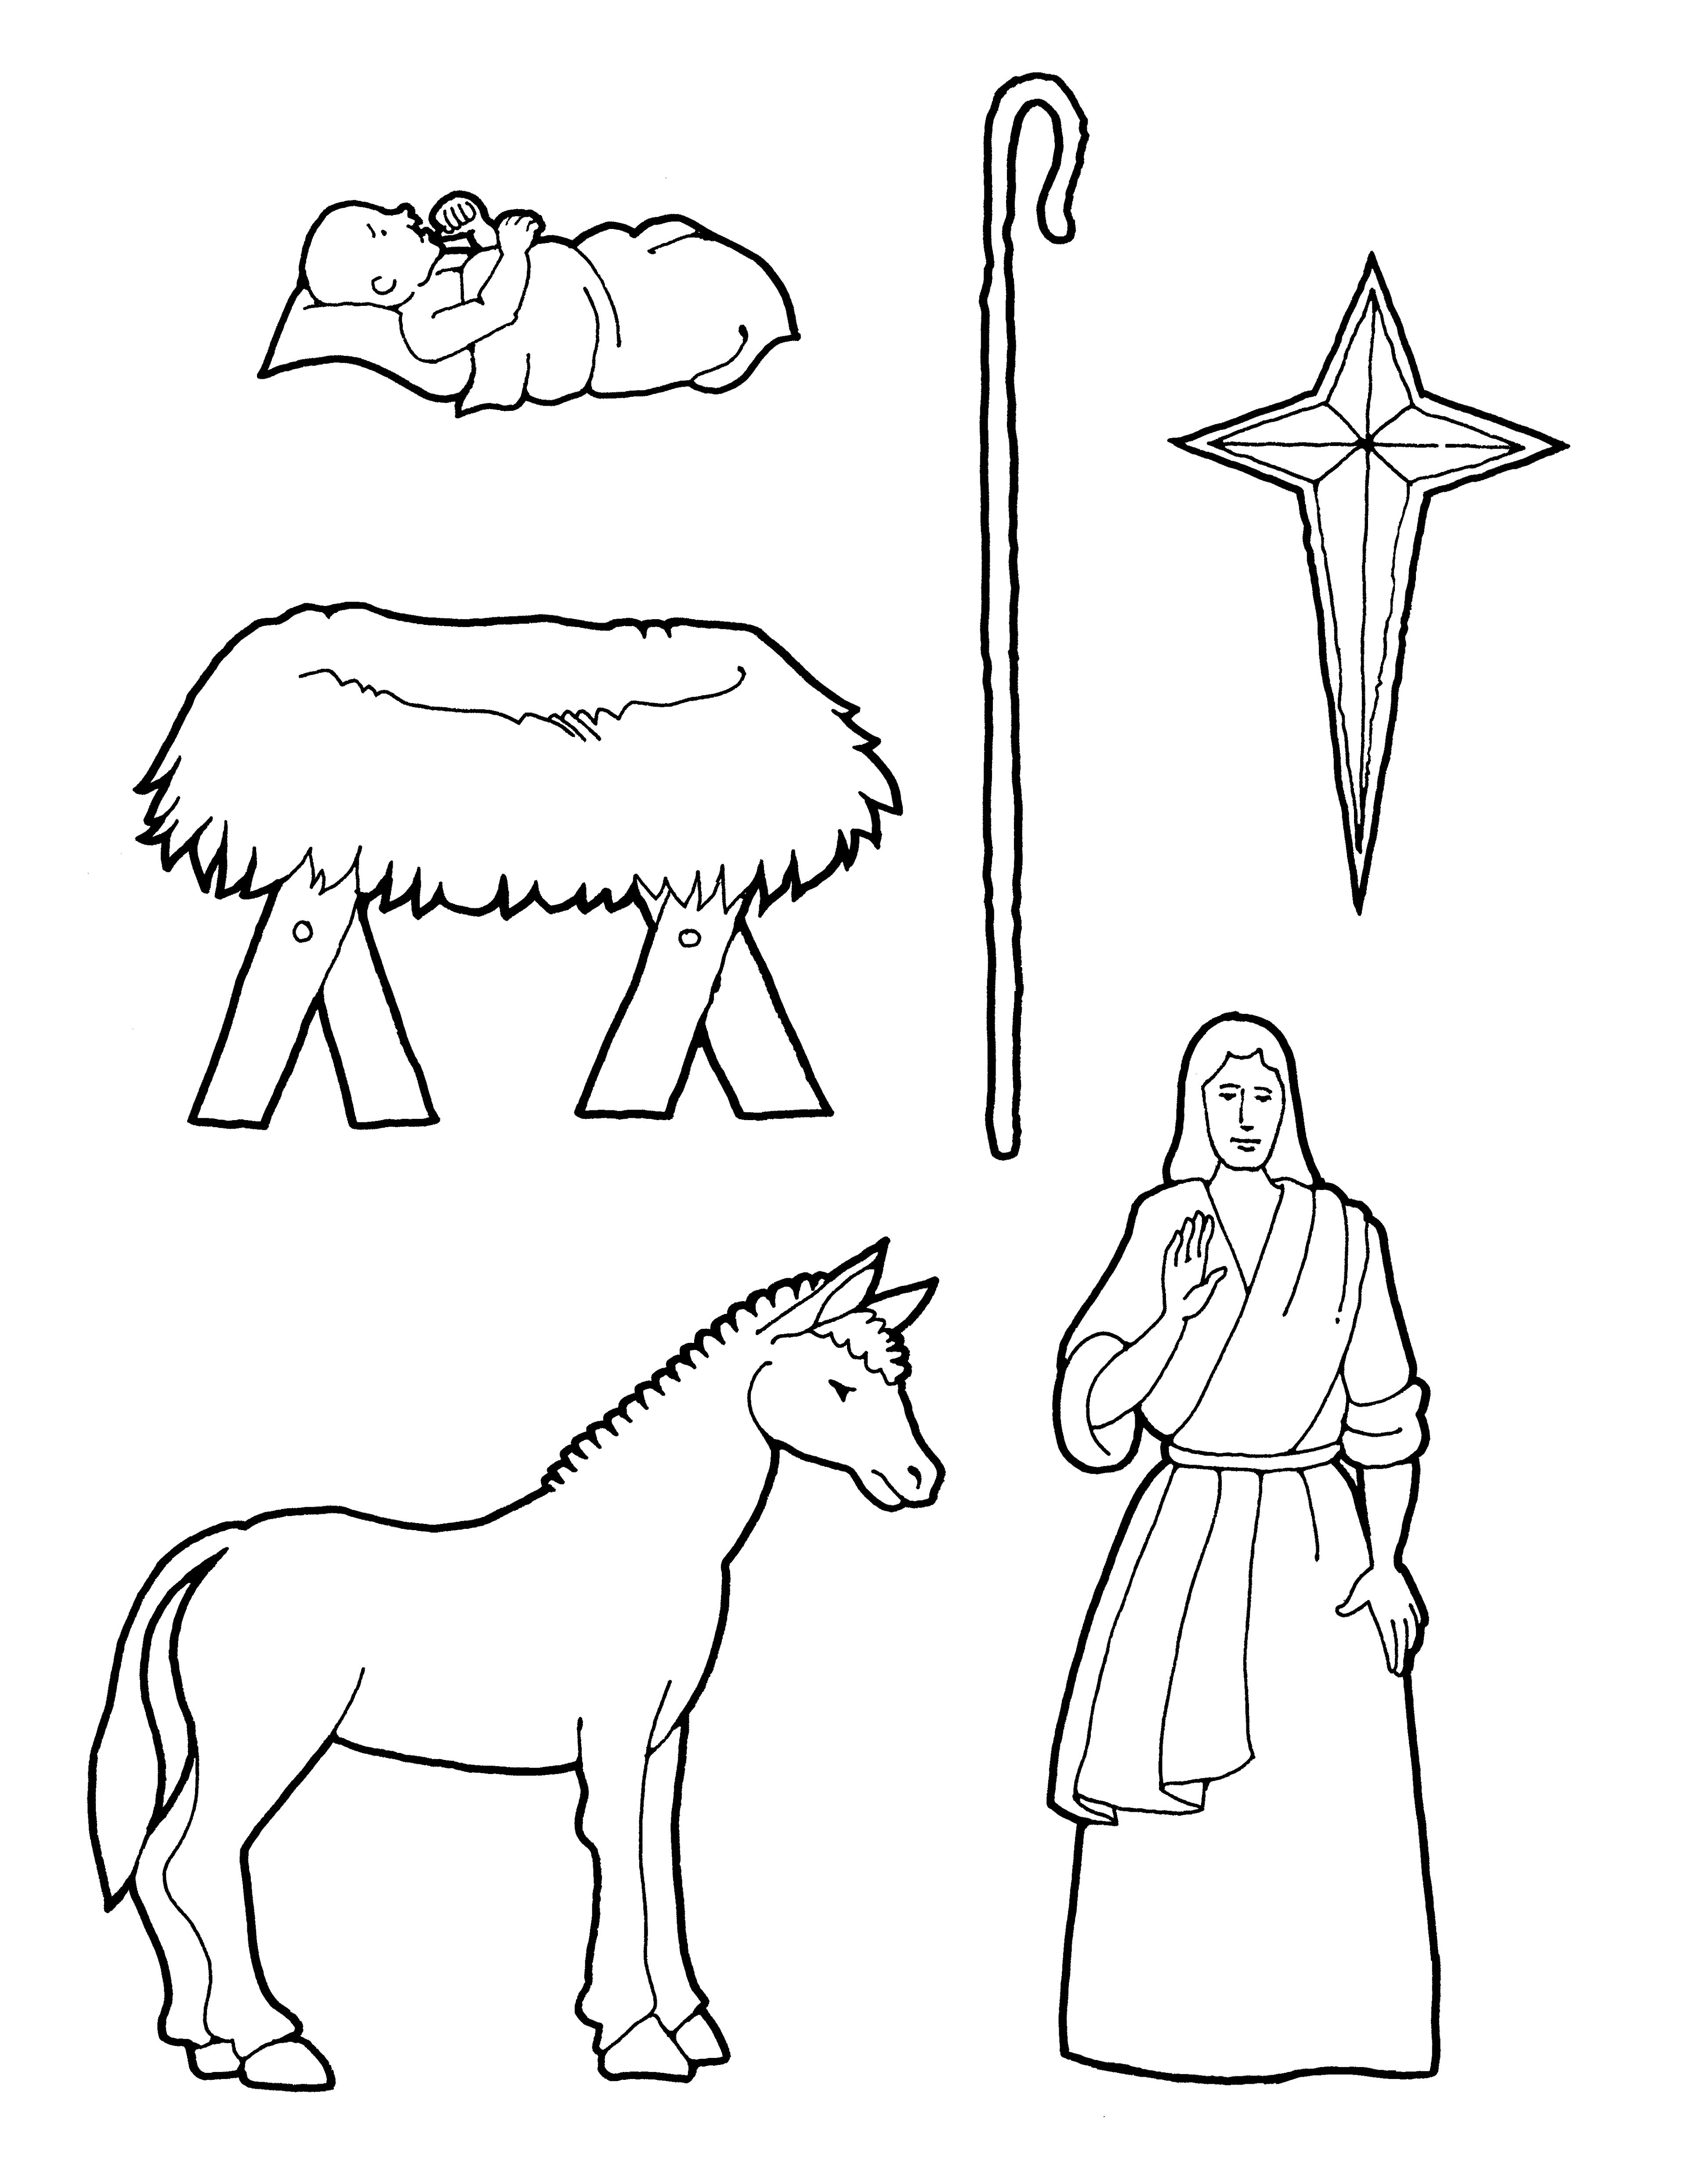 A coloring page of Nativity pieces.